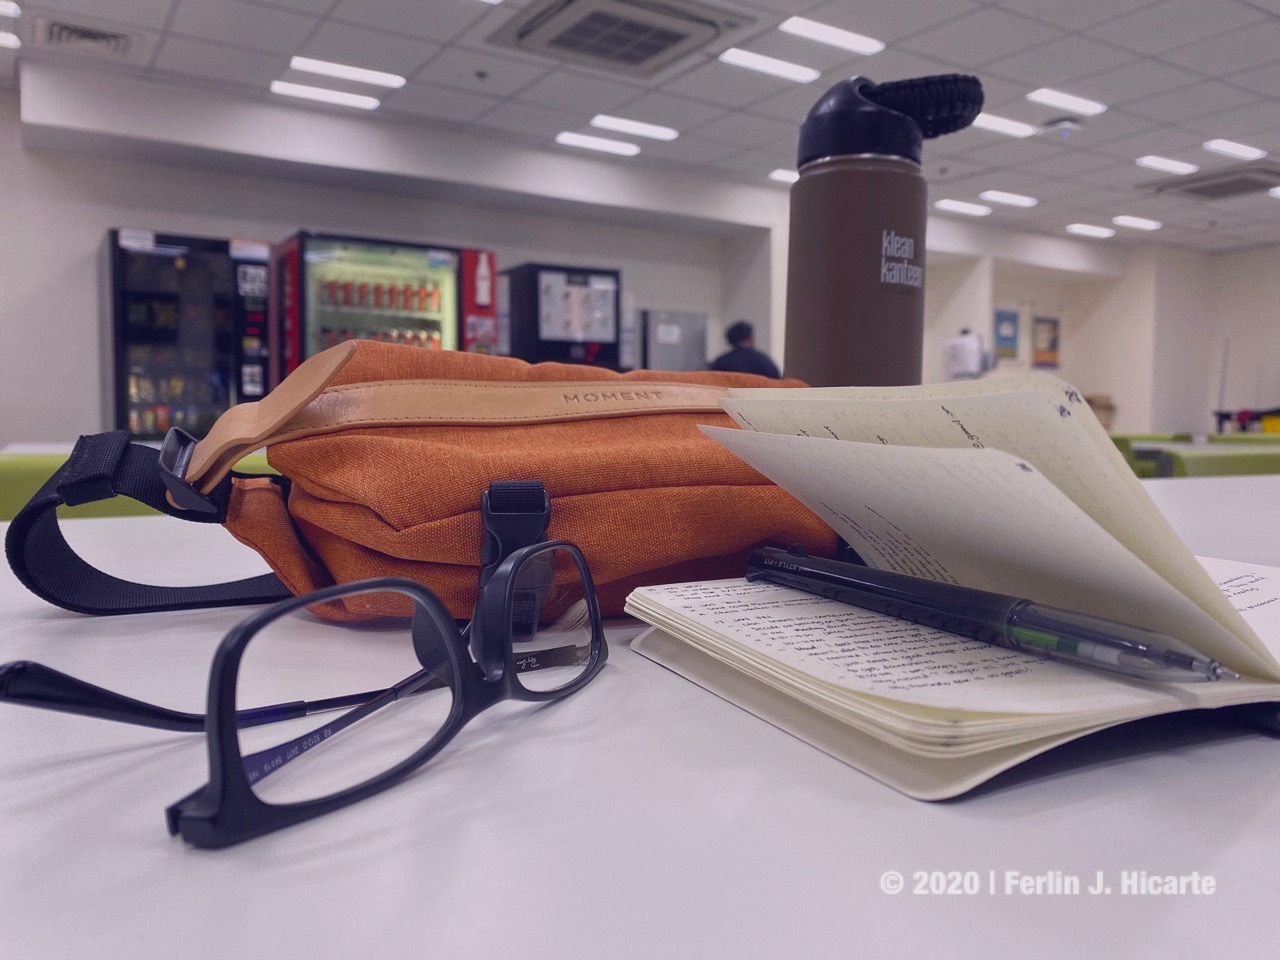 Photo of the sling on a table with my glasses and notebook.